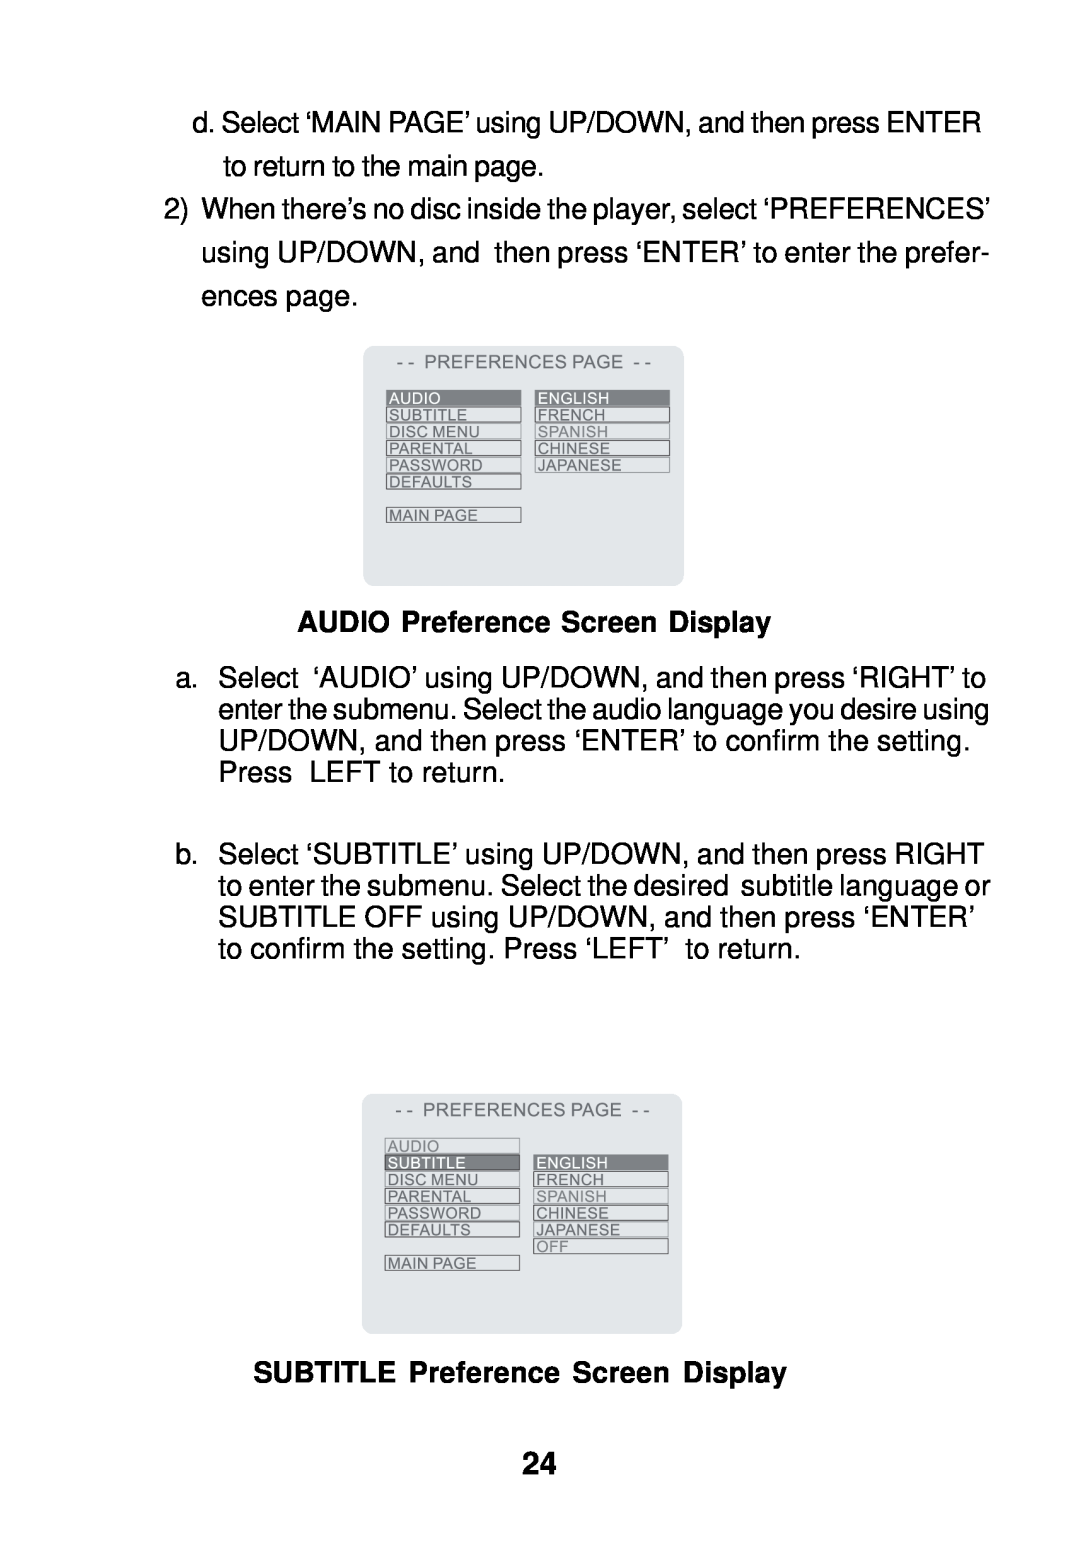 Audiovox AVD300 owner manual AUDIO Preference Screen Display, SUBTITLE Preference Screen Display 